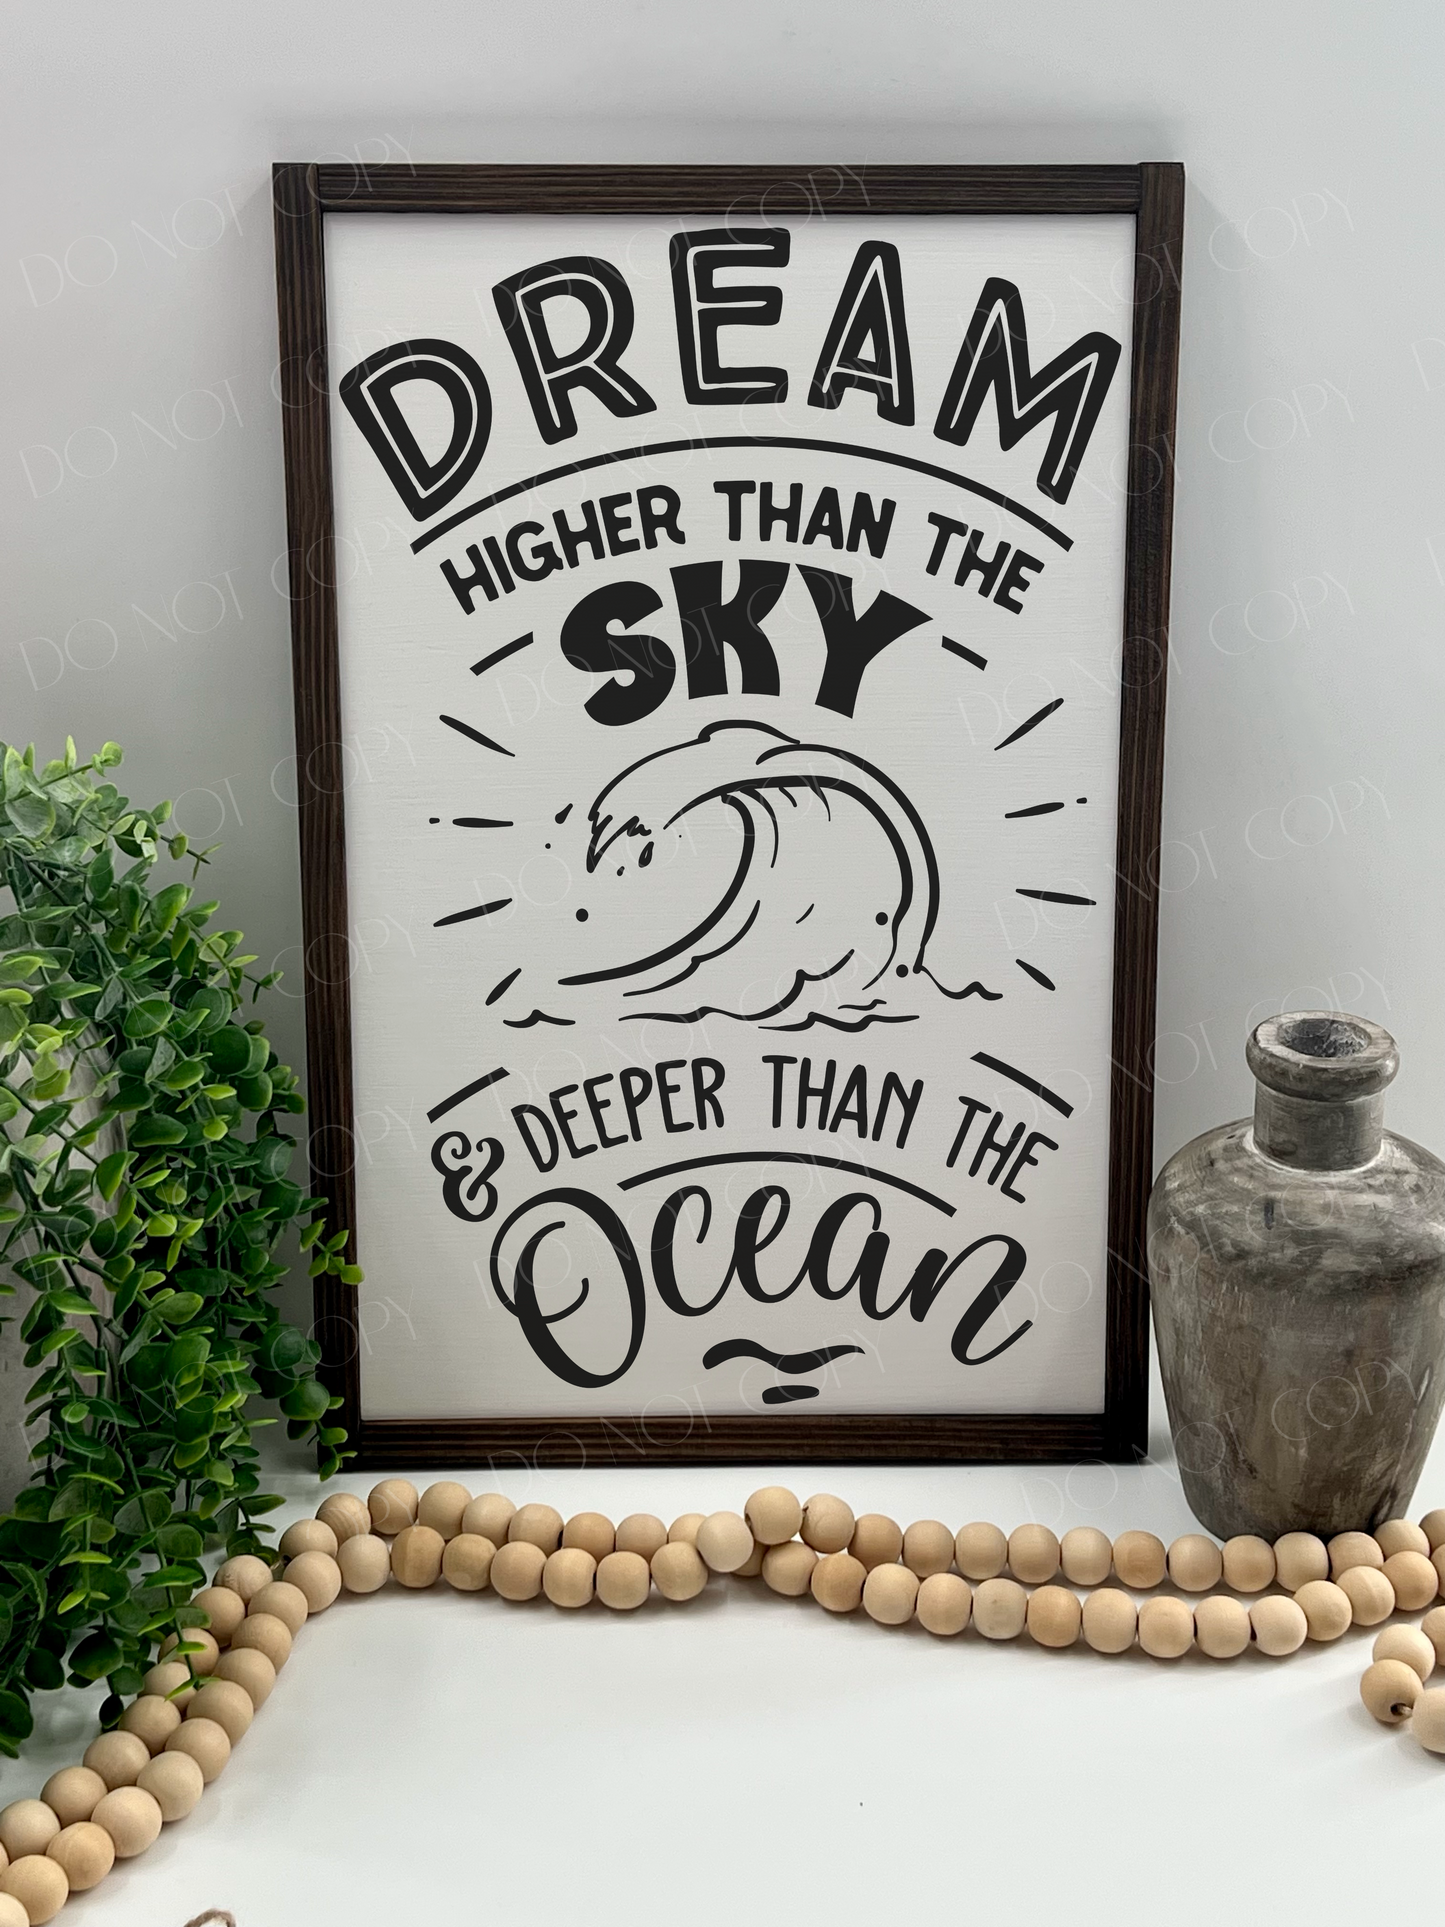 Dream Higher Than The Sky & Deeper Than The Sea - White/Thick/E. Black - Wood Sign